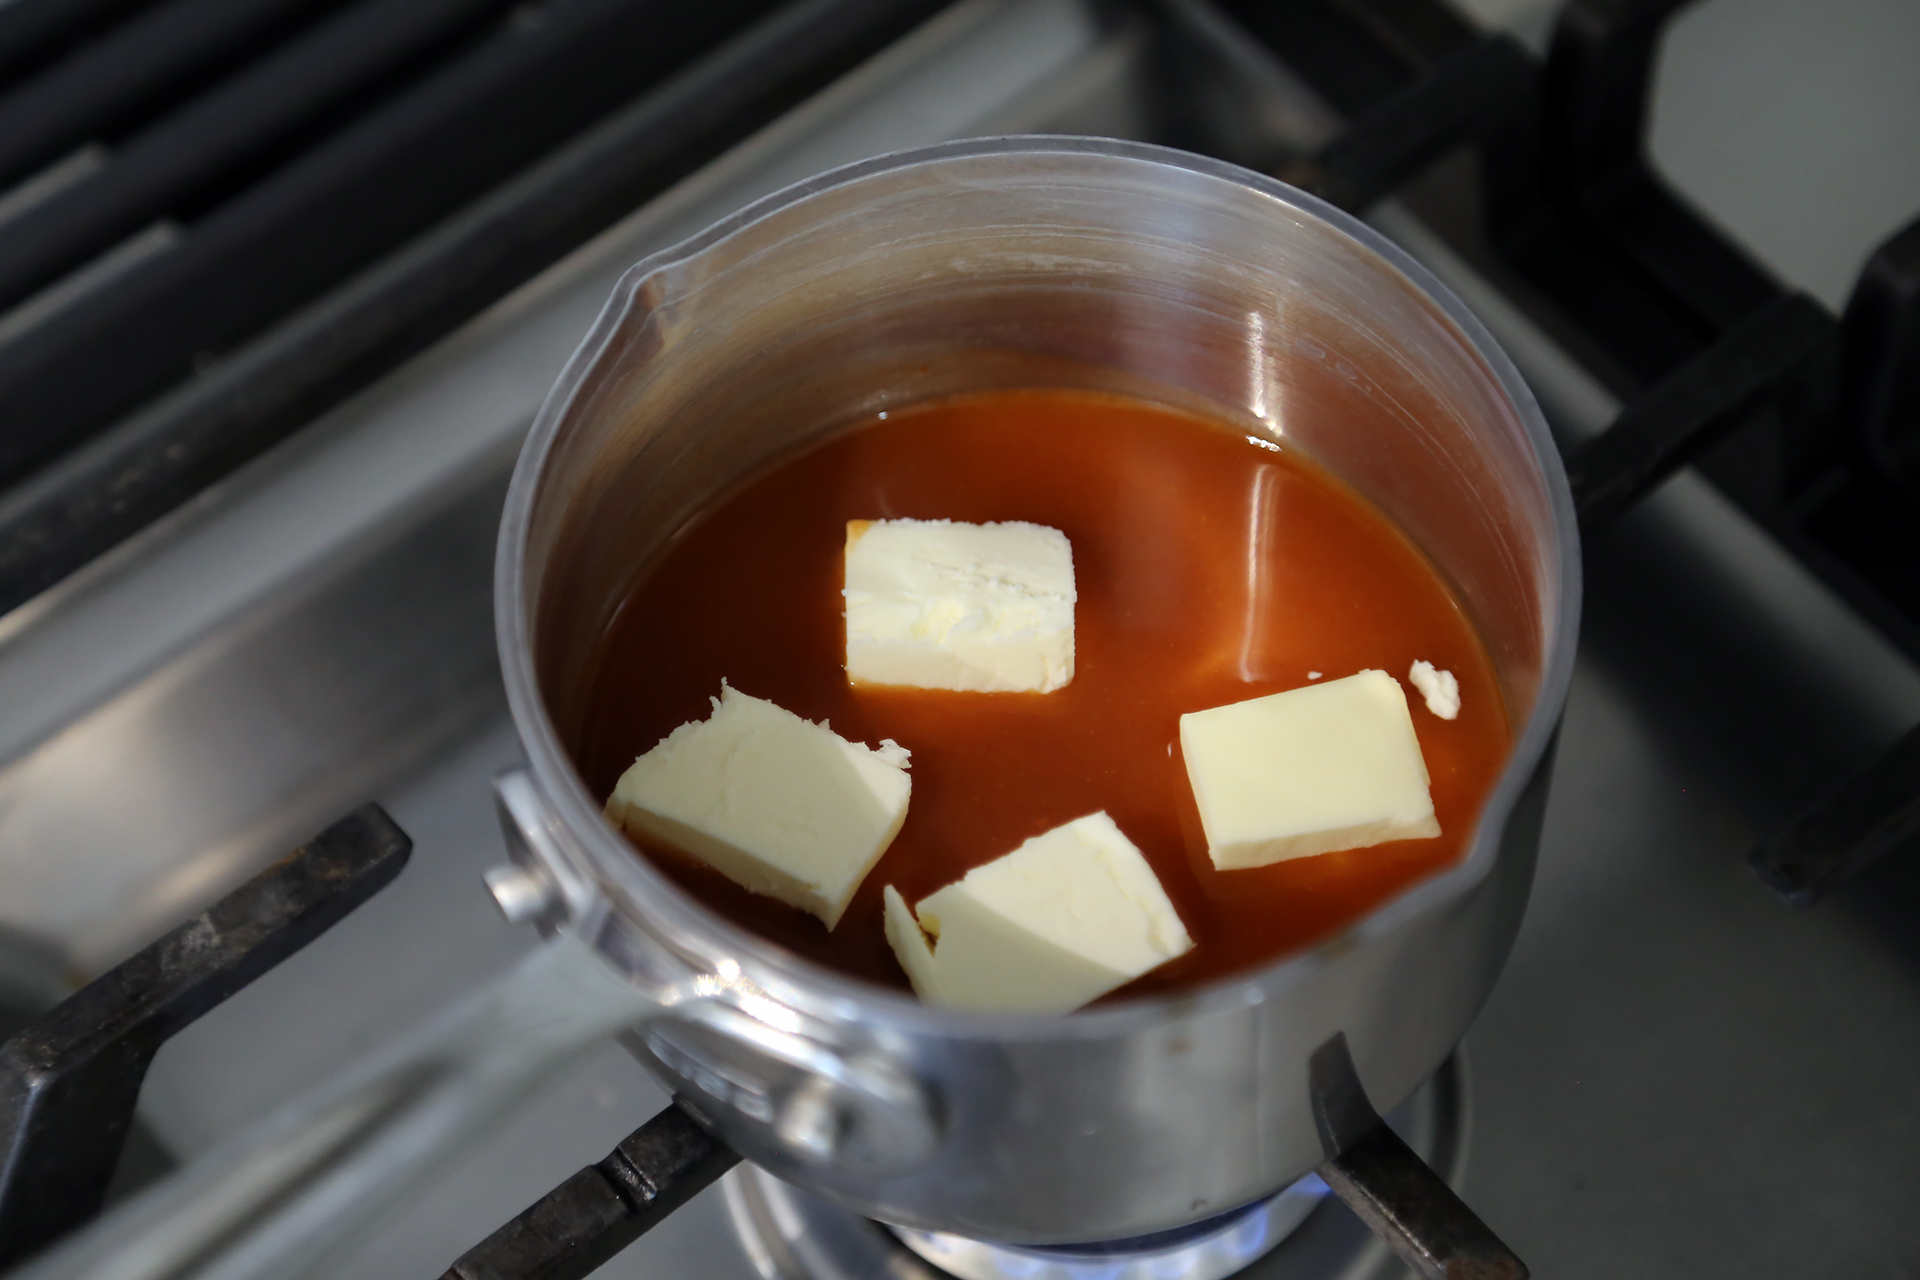 To make the sauce, in a small saucepan over medium heat, add the butter to the hot sauce and whisk to combine.